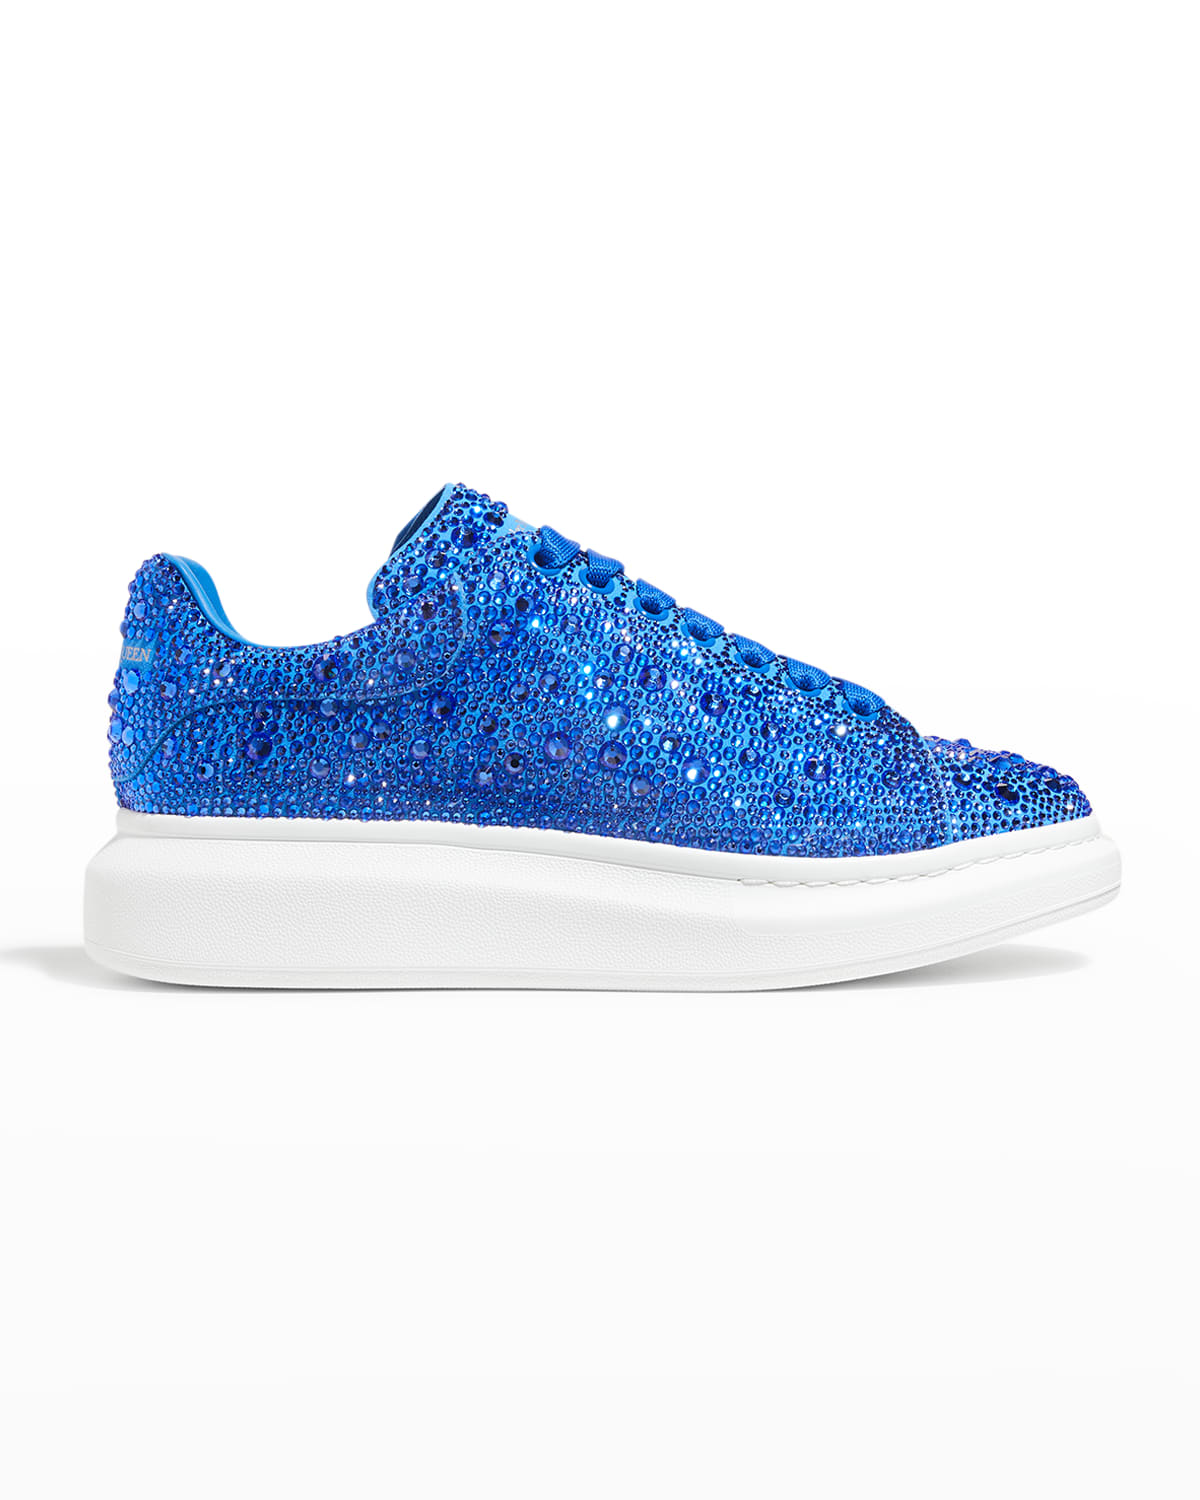 Alexander McQueen Leather Crystal-Embellished Oversized Sneakers